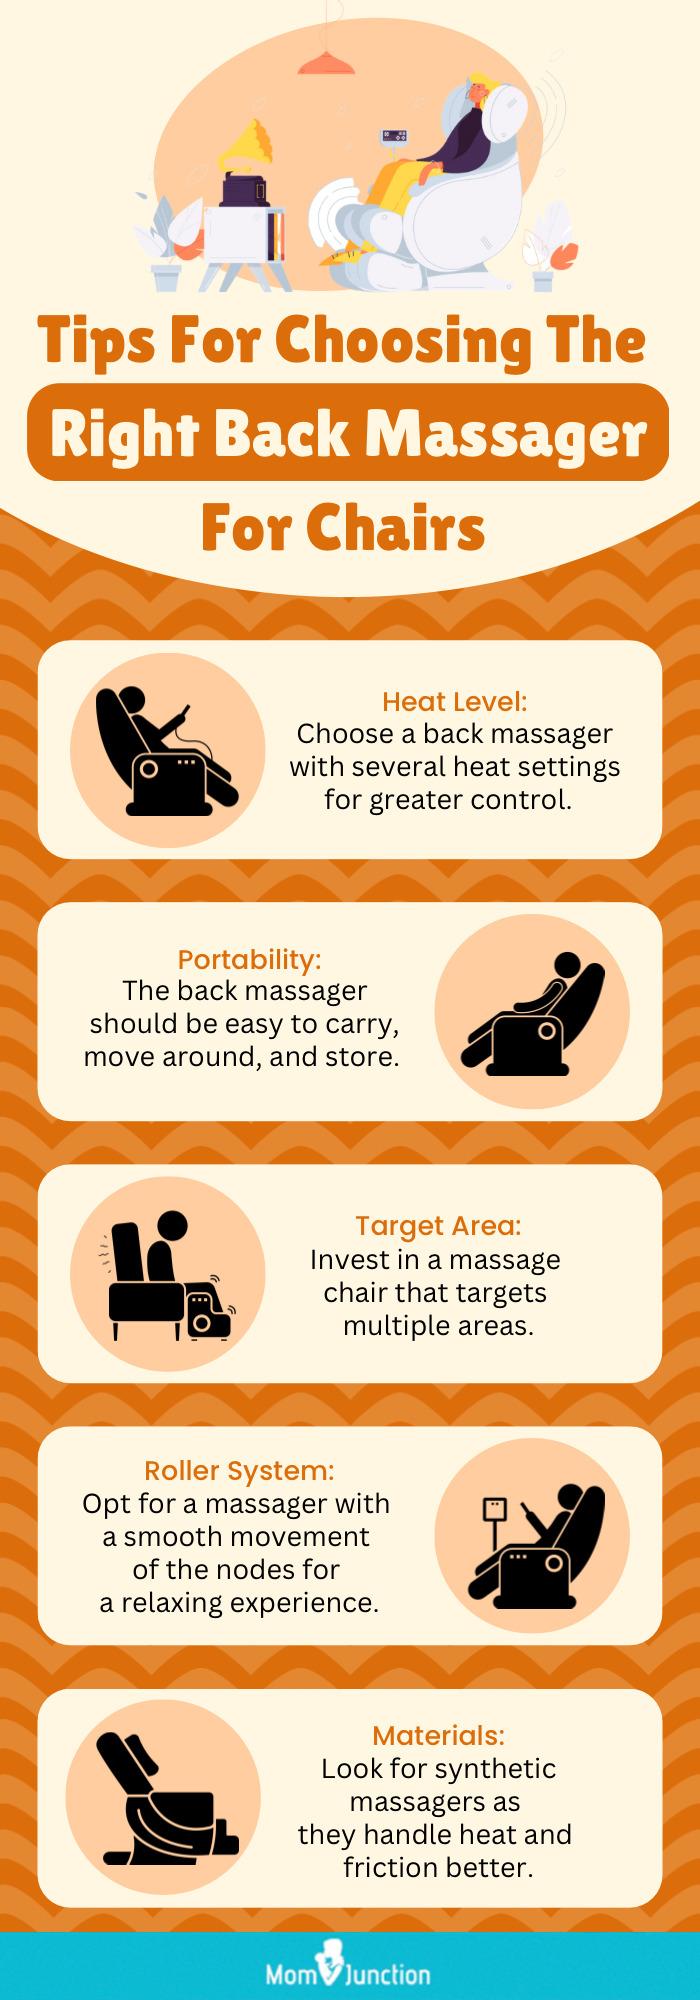 Tips For Choosing The Right Back Massanger For Chairs (infographic)